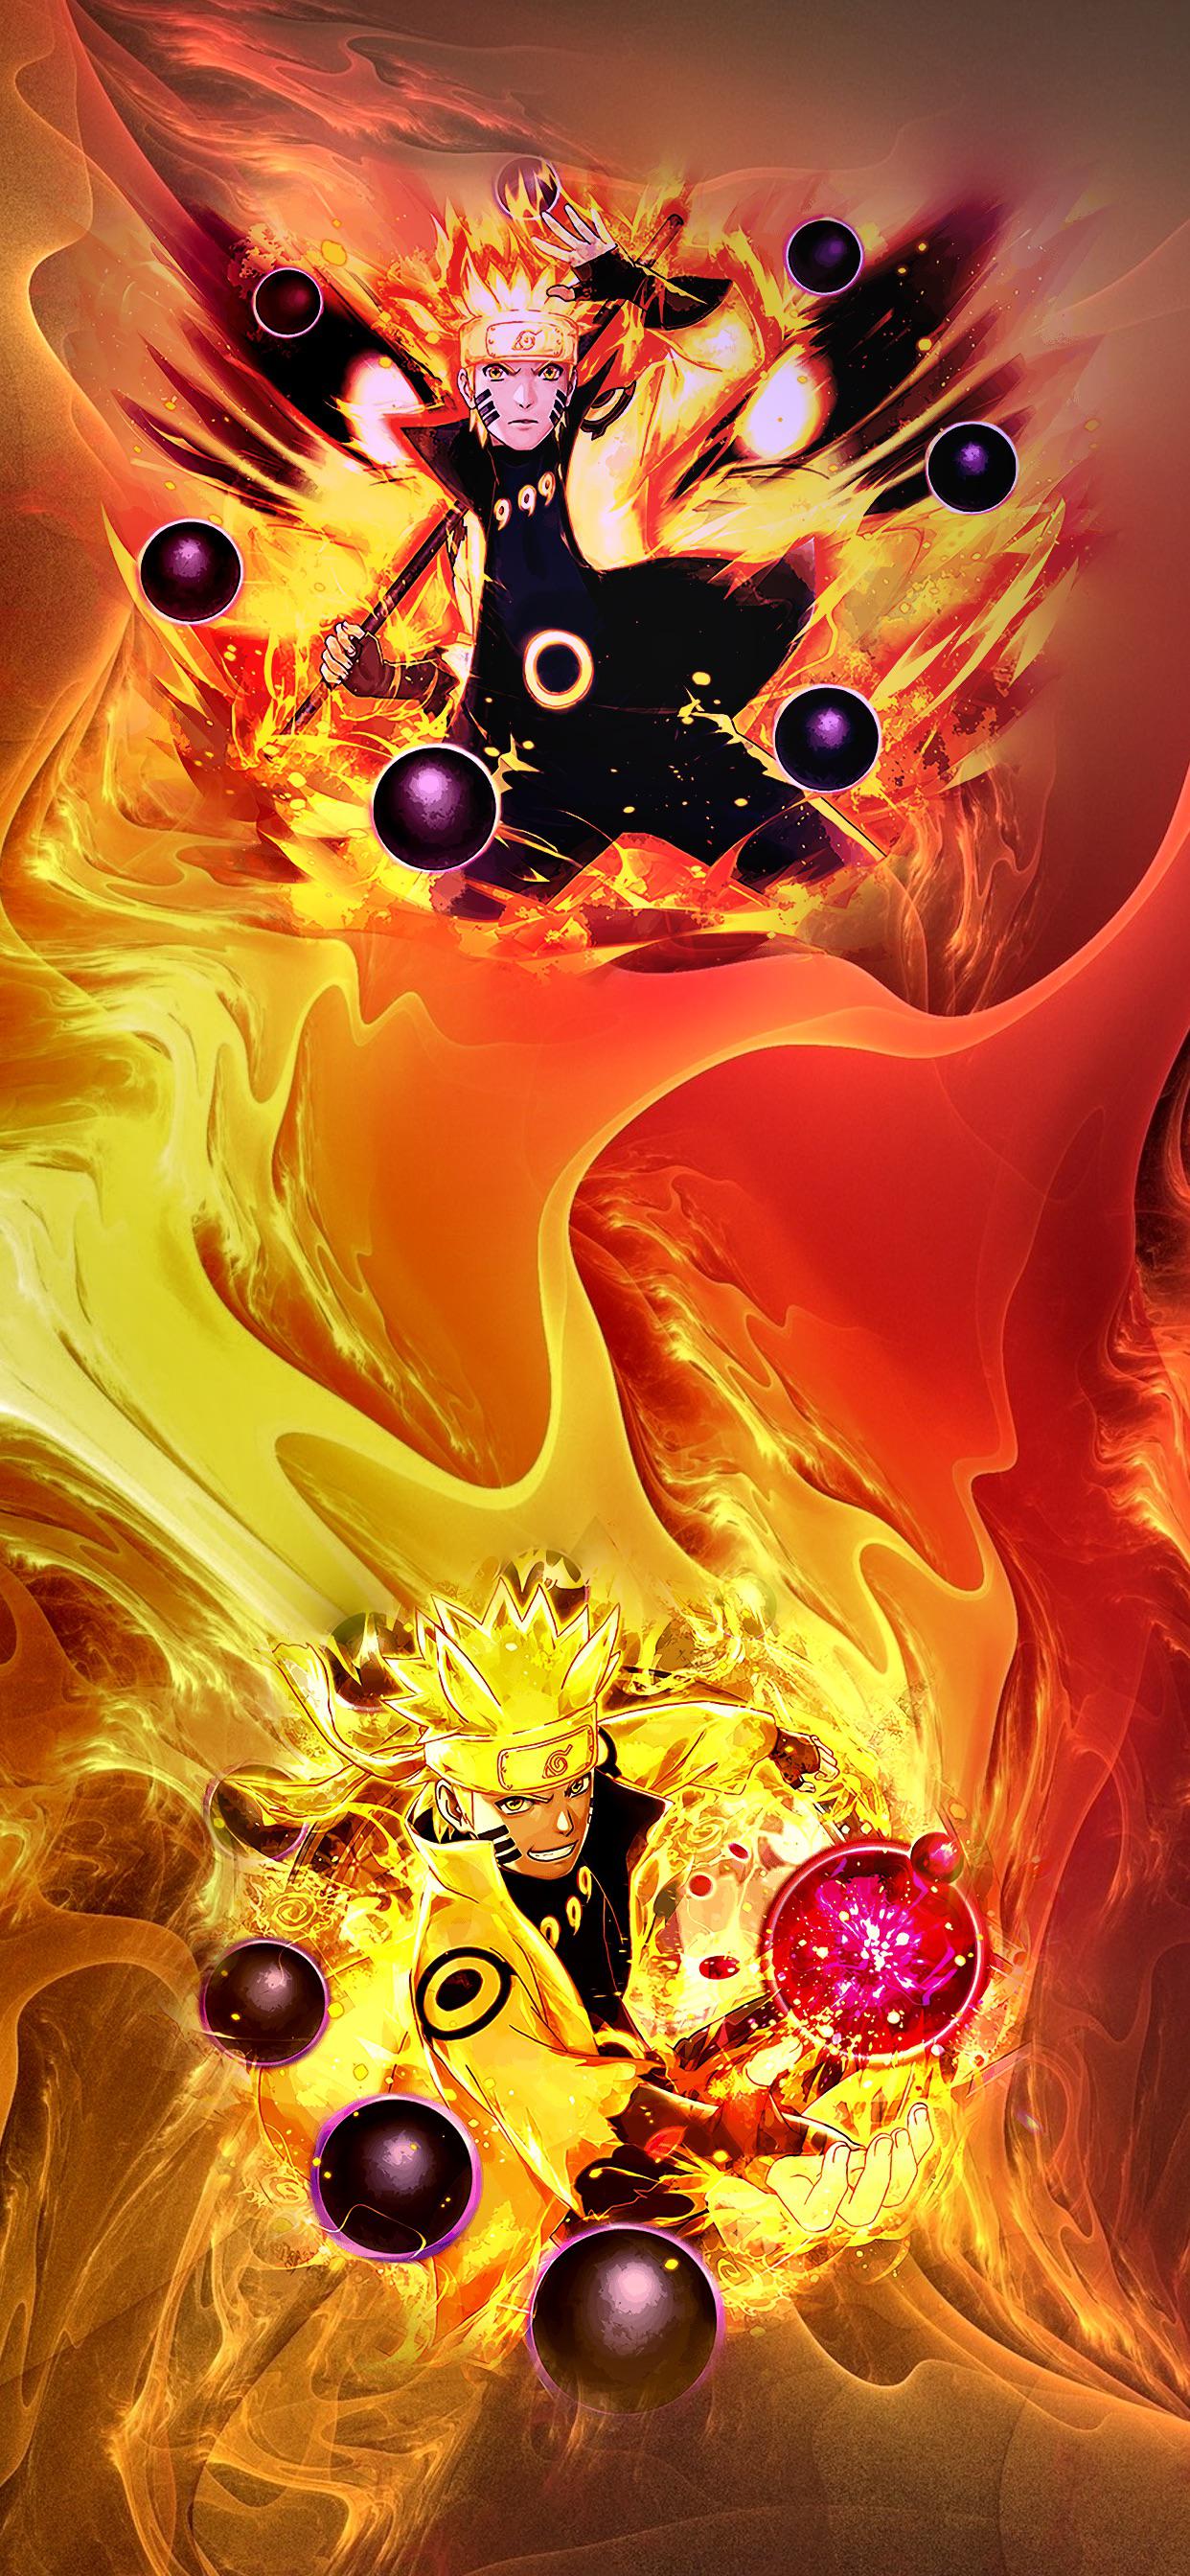 Made A Naruto Blazing iPhone Wallpaper What Do You Think More